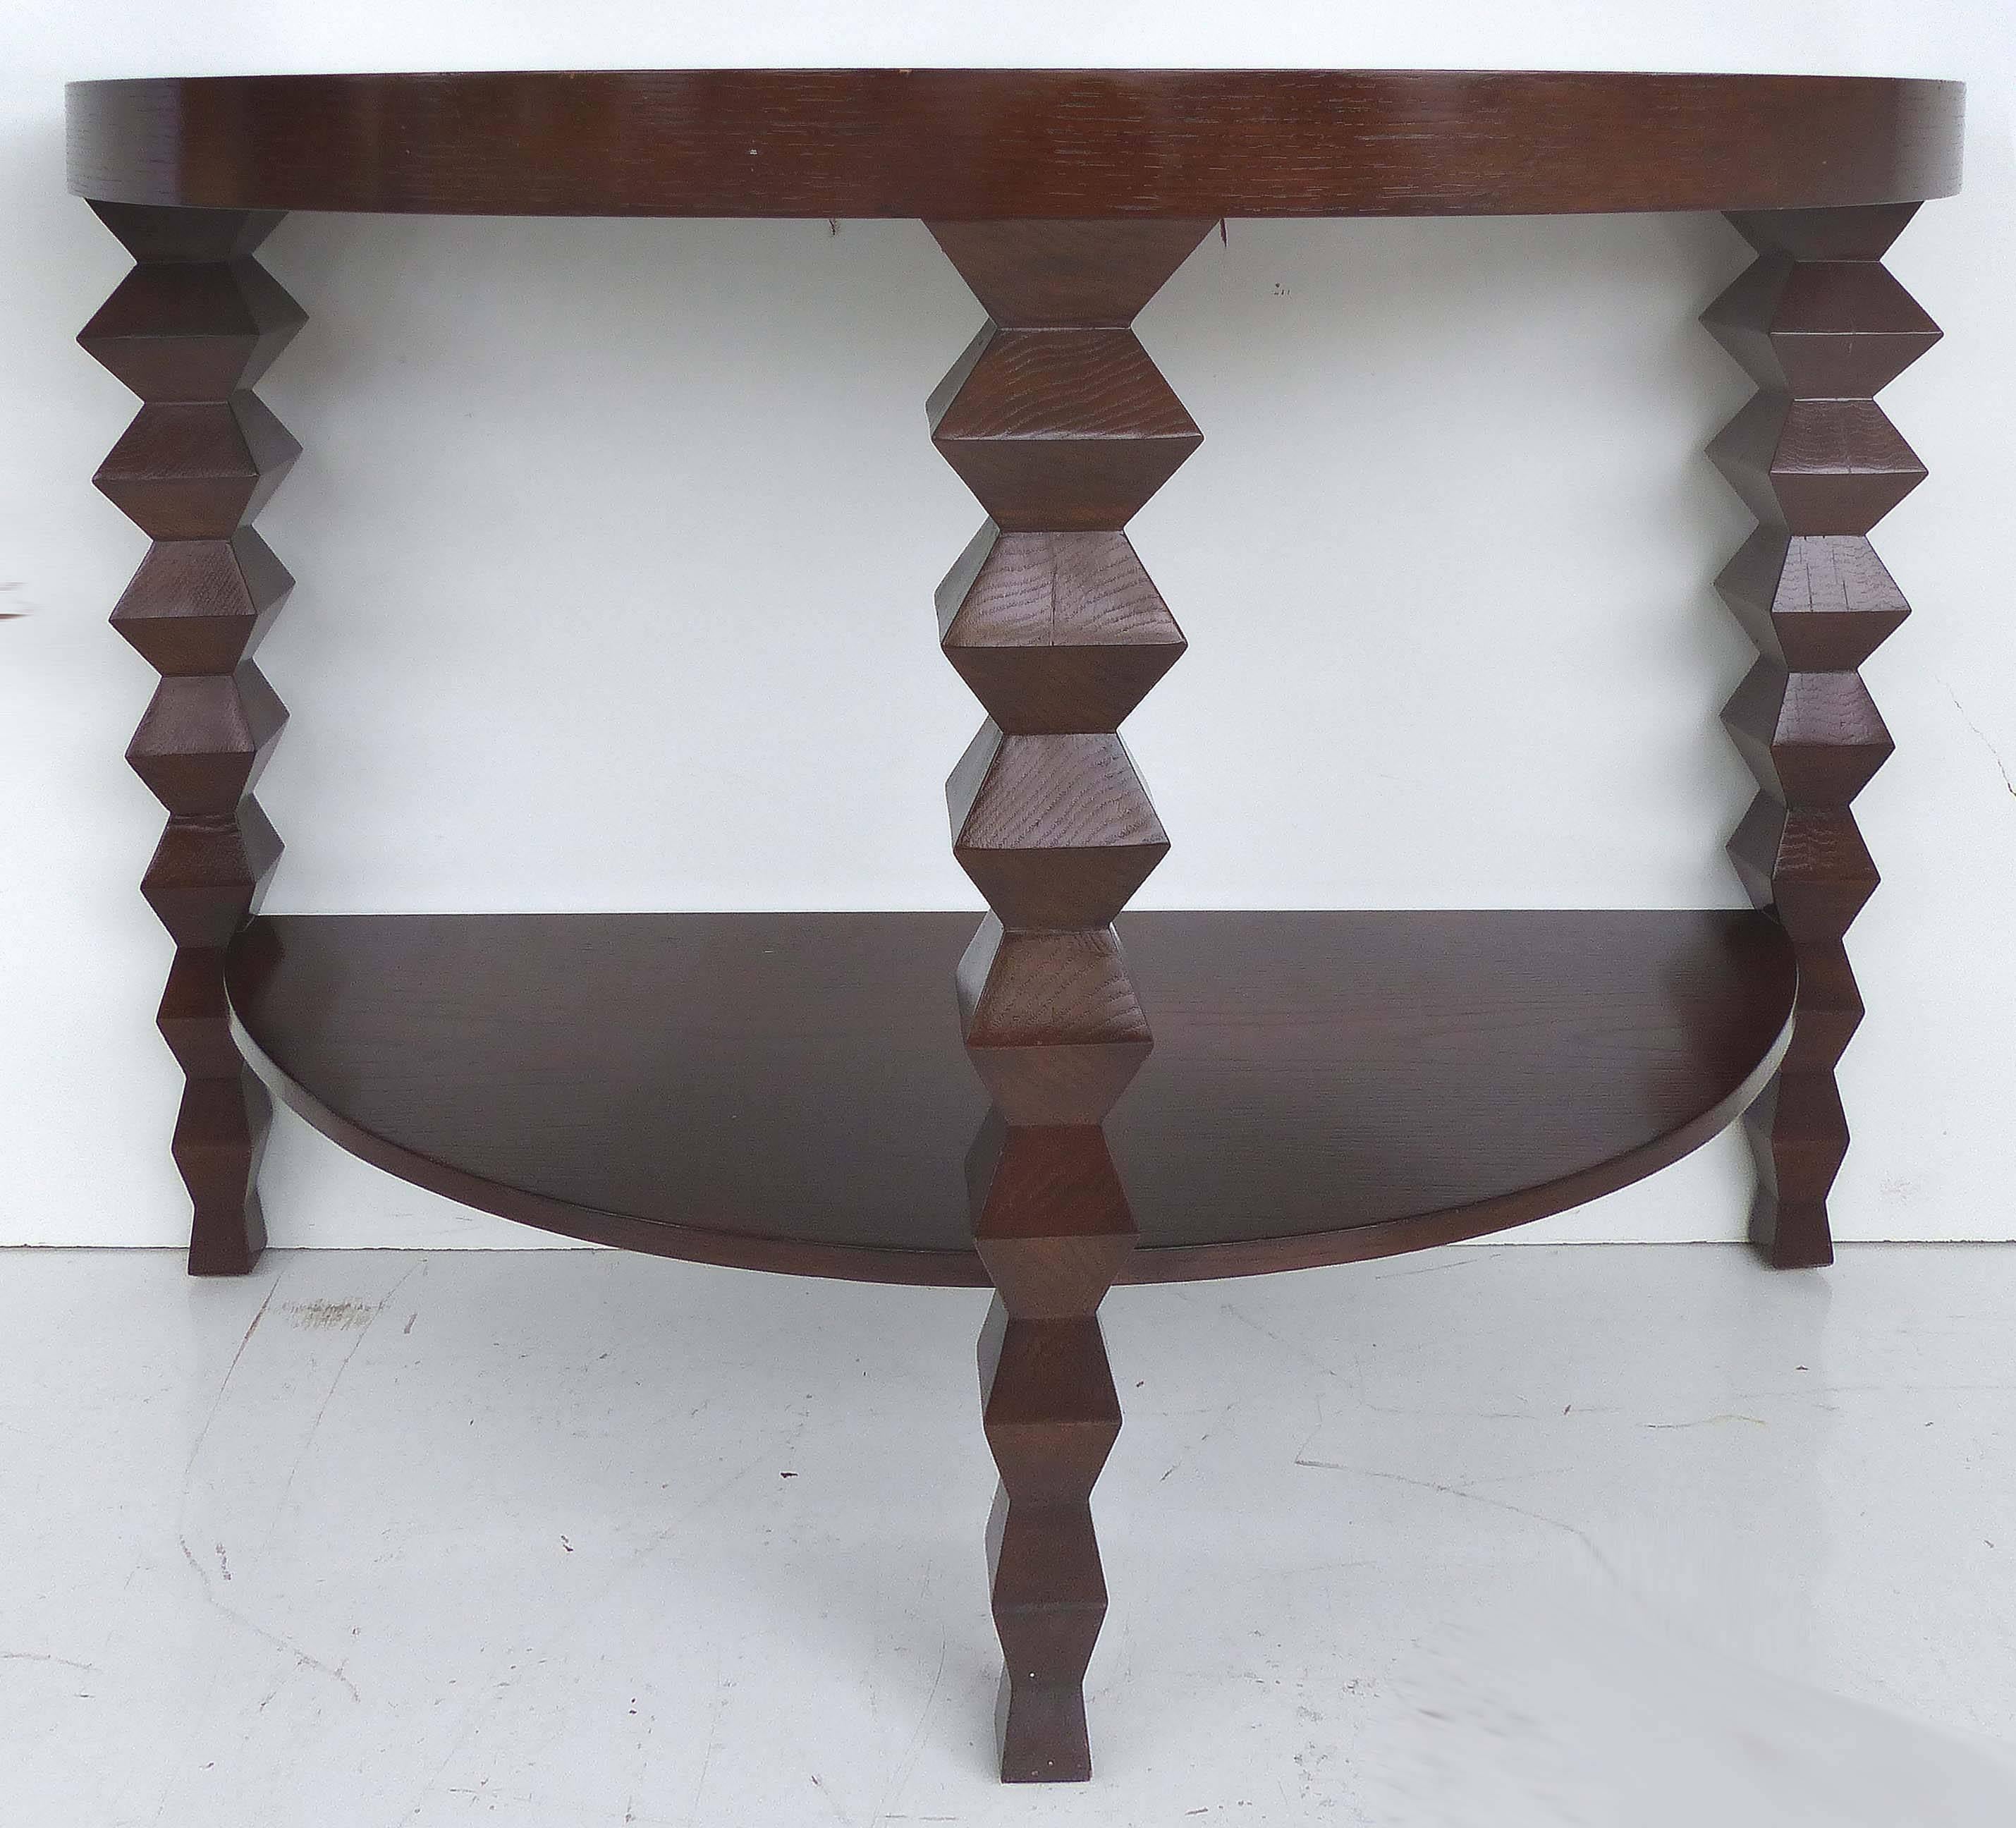 Offered for sale is a Donghia demilune console table from the Donghia "Zig-Zag" Collection with three sculptural legs and a lower tier. This console is a recent acquisition from an affluent Miami Beach condo. This is a rare and sought